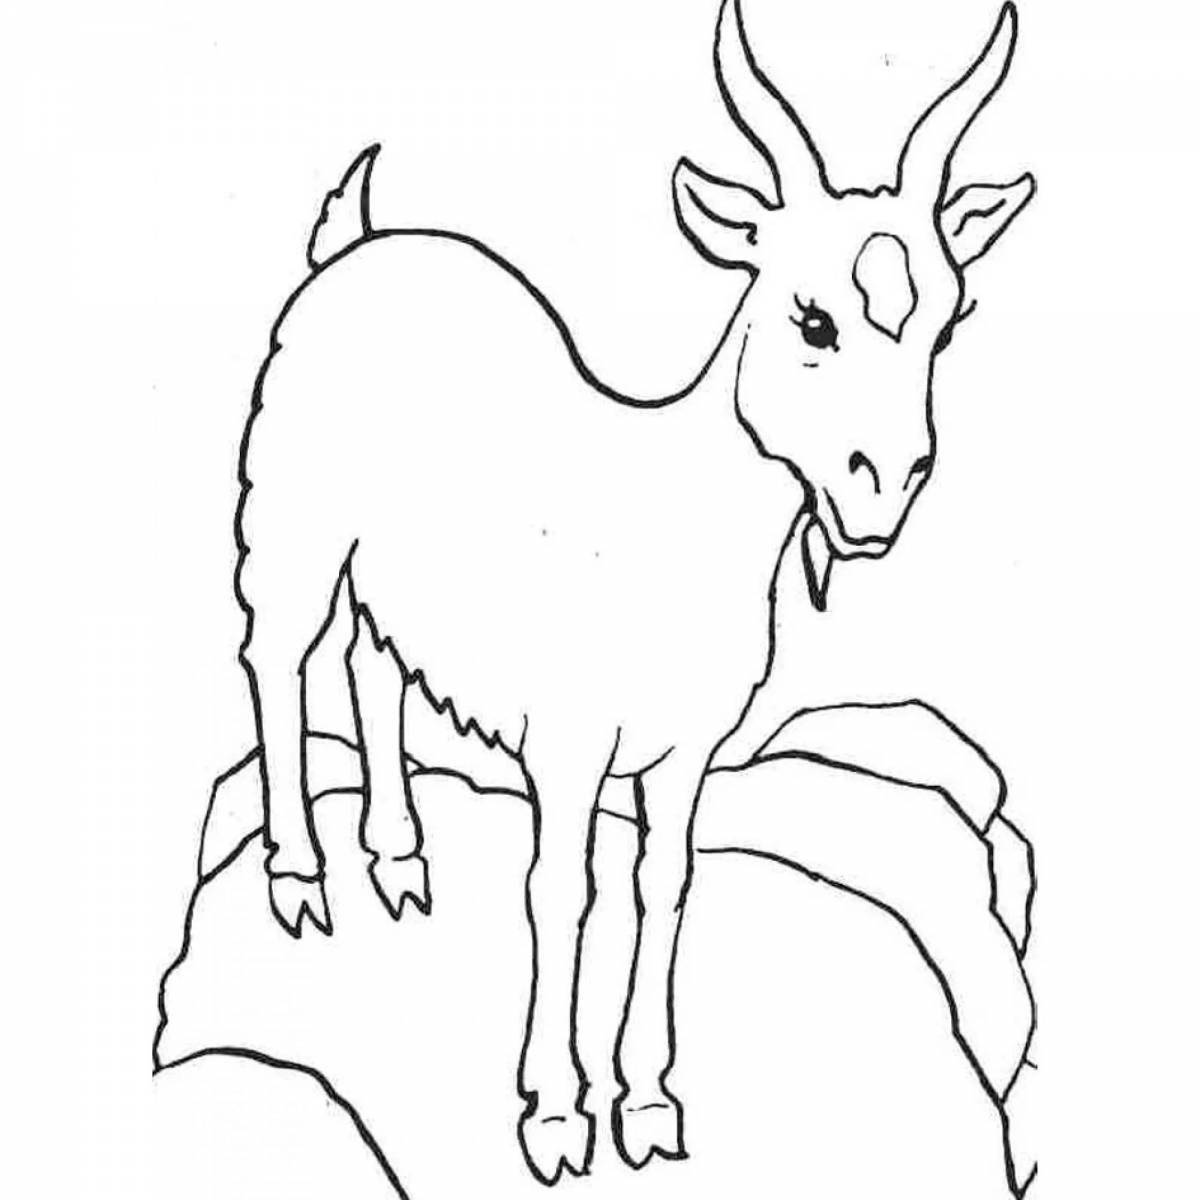 Bright goat coloring book for kids